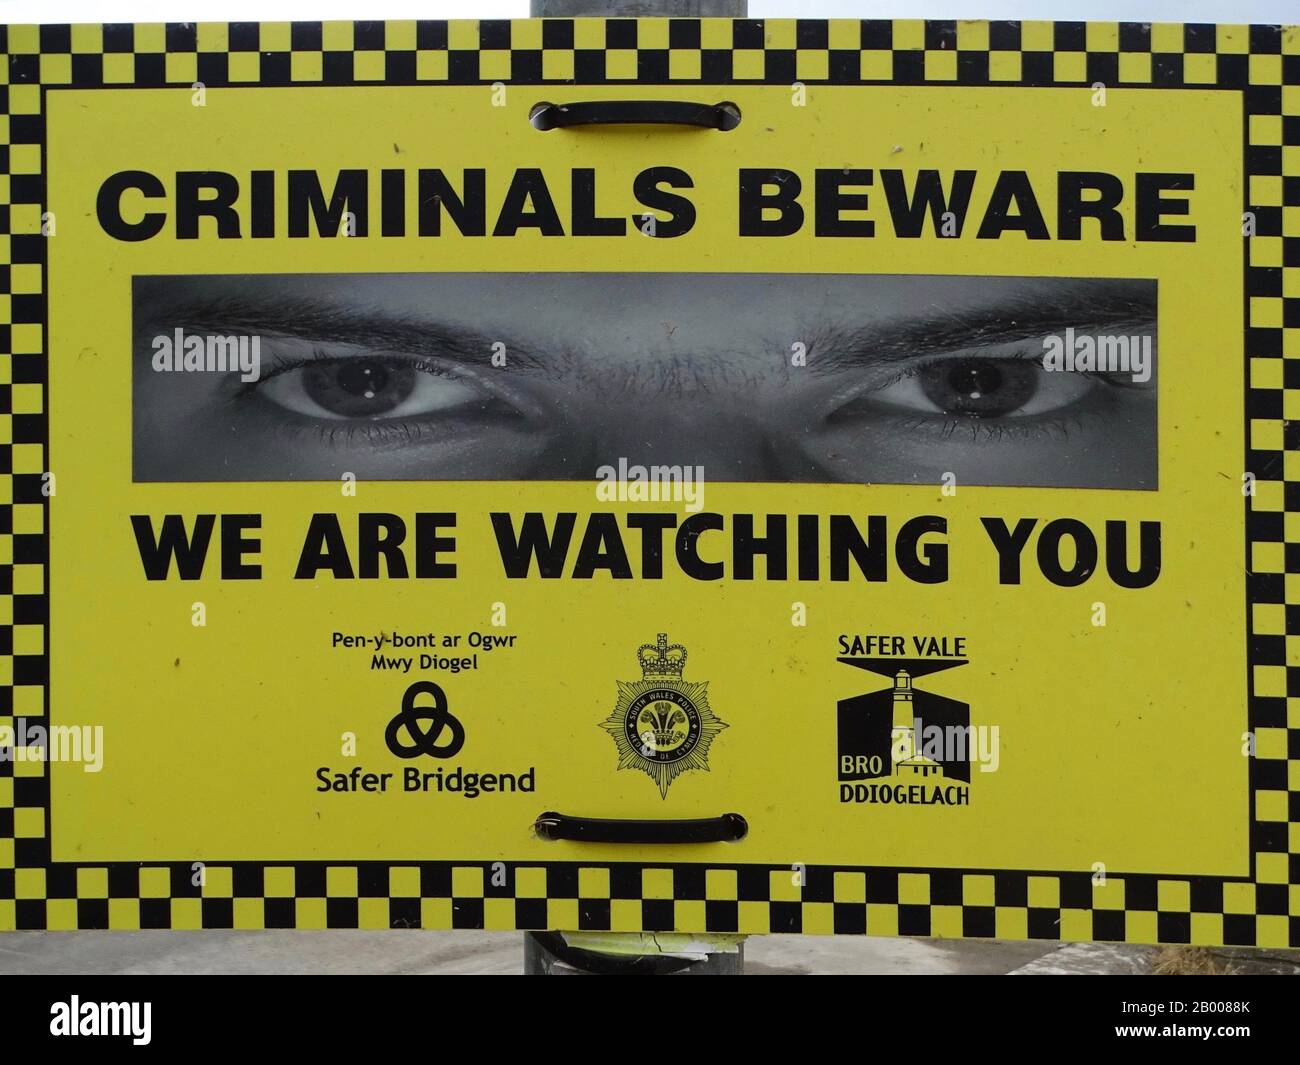 A sign advising criminals that they are being watched. Stock Photo